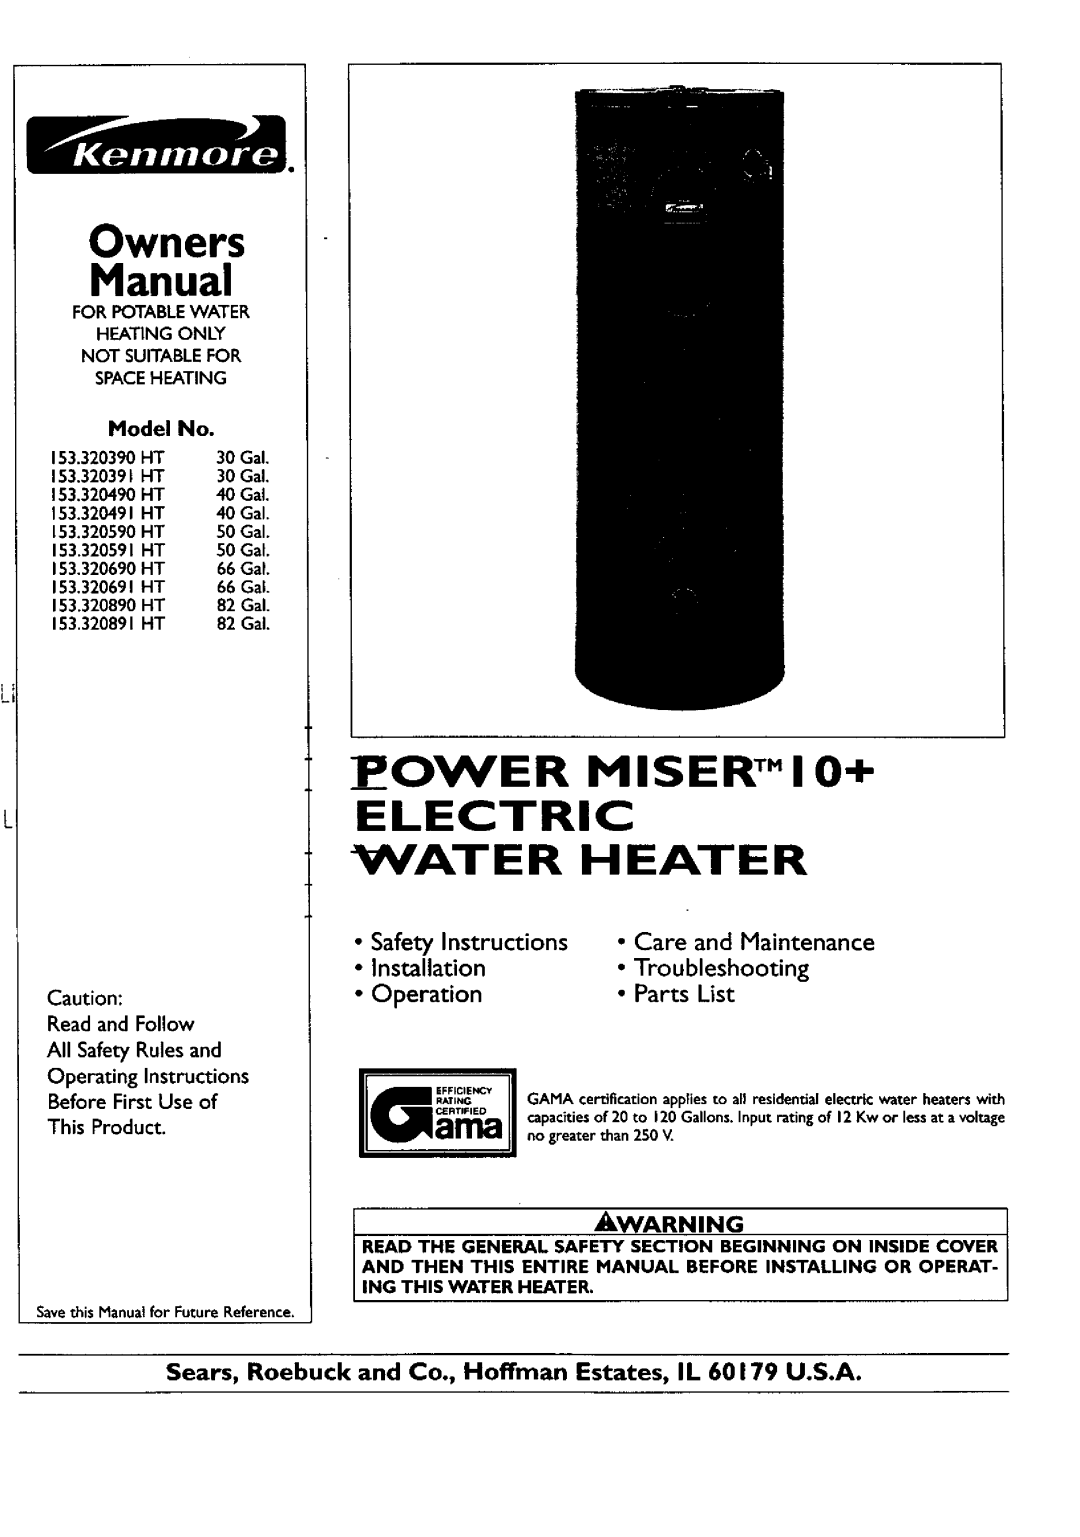 Kenmore 153.320891 HT 82 GAL owner manual P Ower Miser Tm I O+, Electric Water Heater, Installation, Troubleshooting 